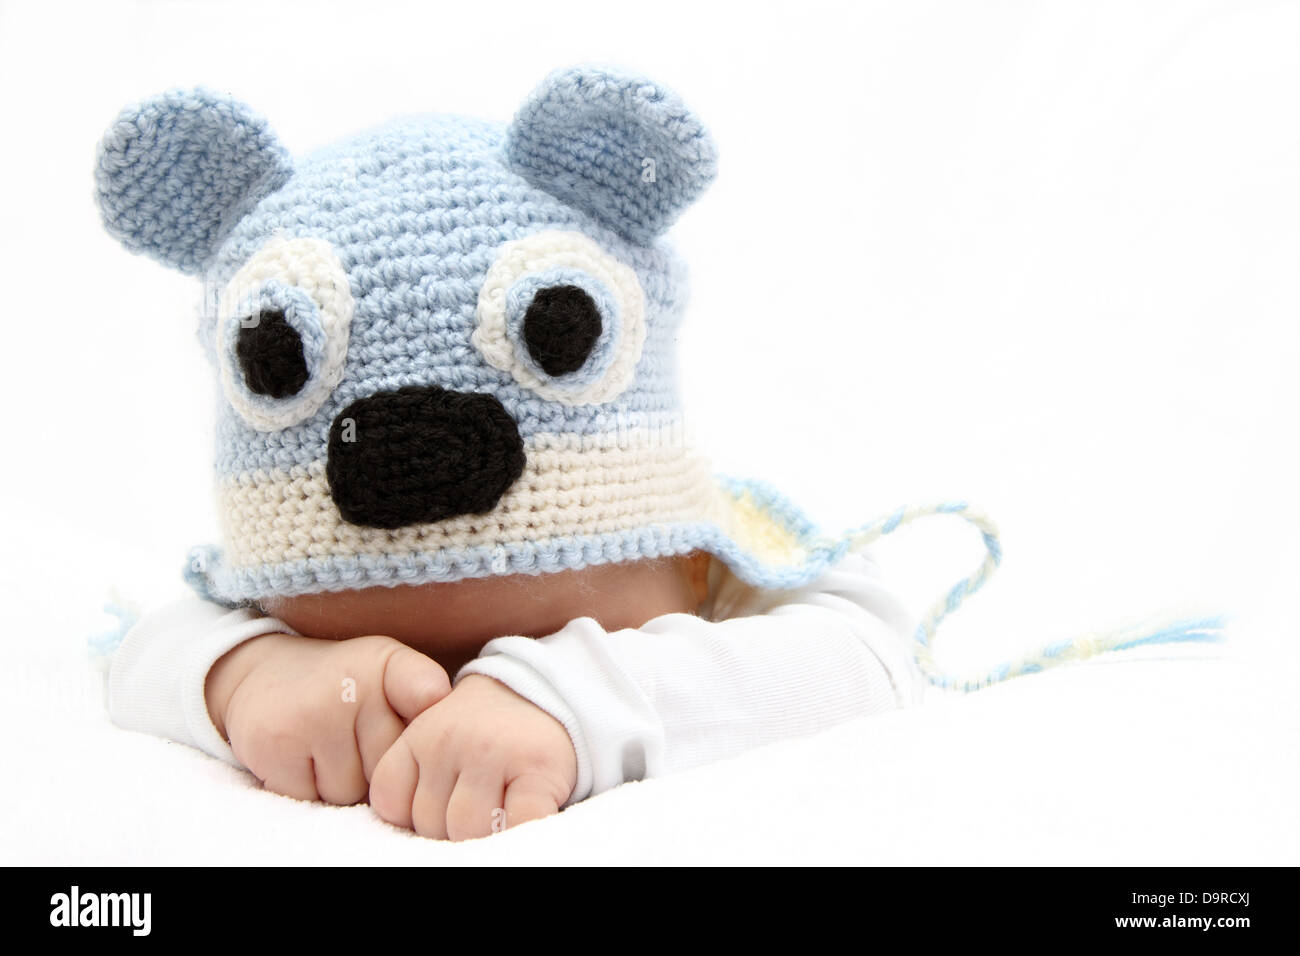 Baby with a knitted blue hat baby on stomach Stock Photo